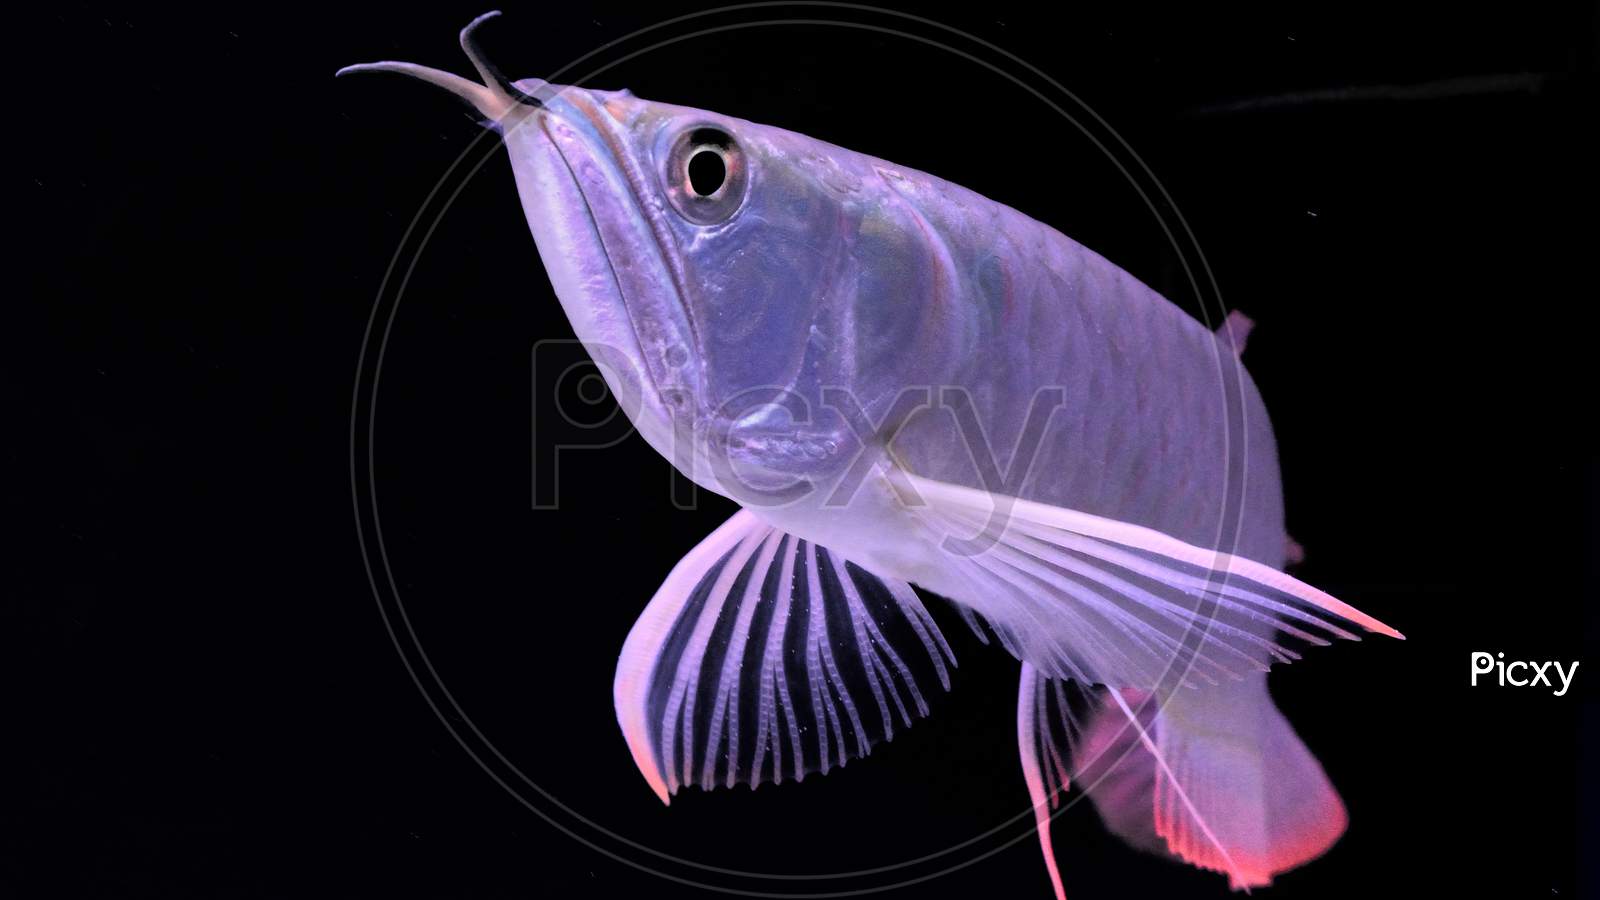 Image Of A Close Up Of Silver Arowana Fish With Black Background AX281675 Picxy